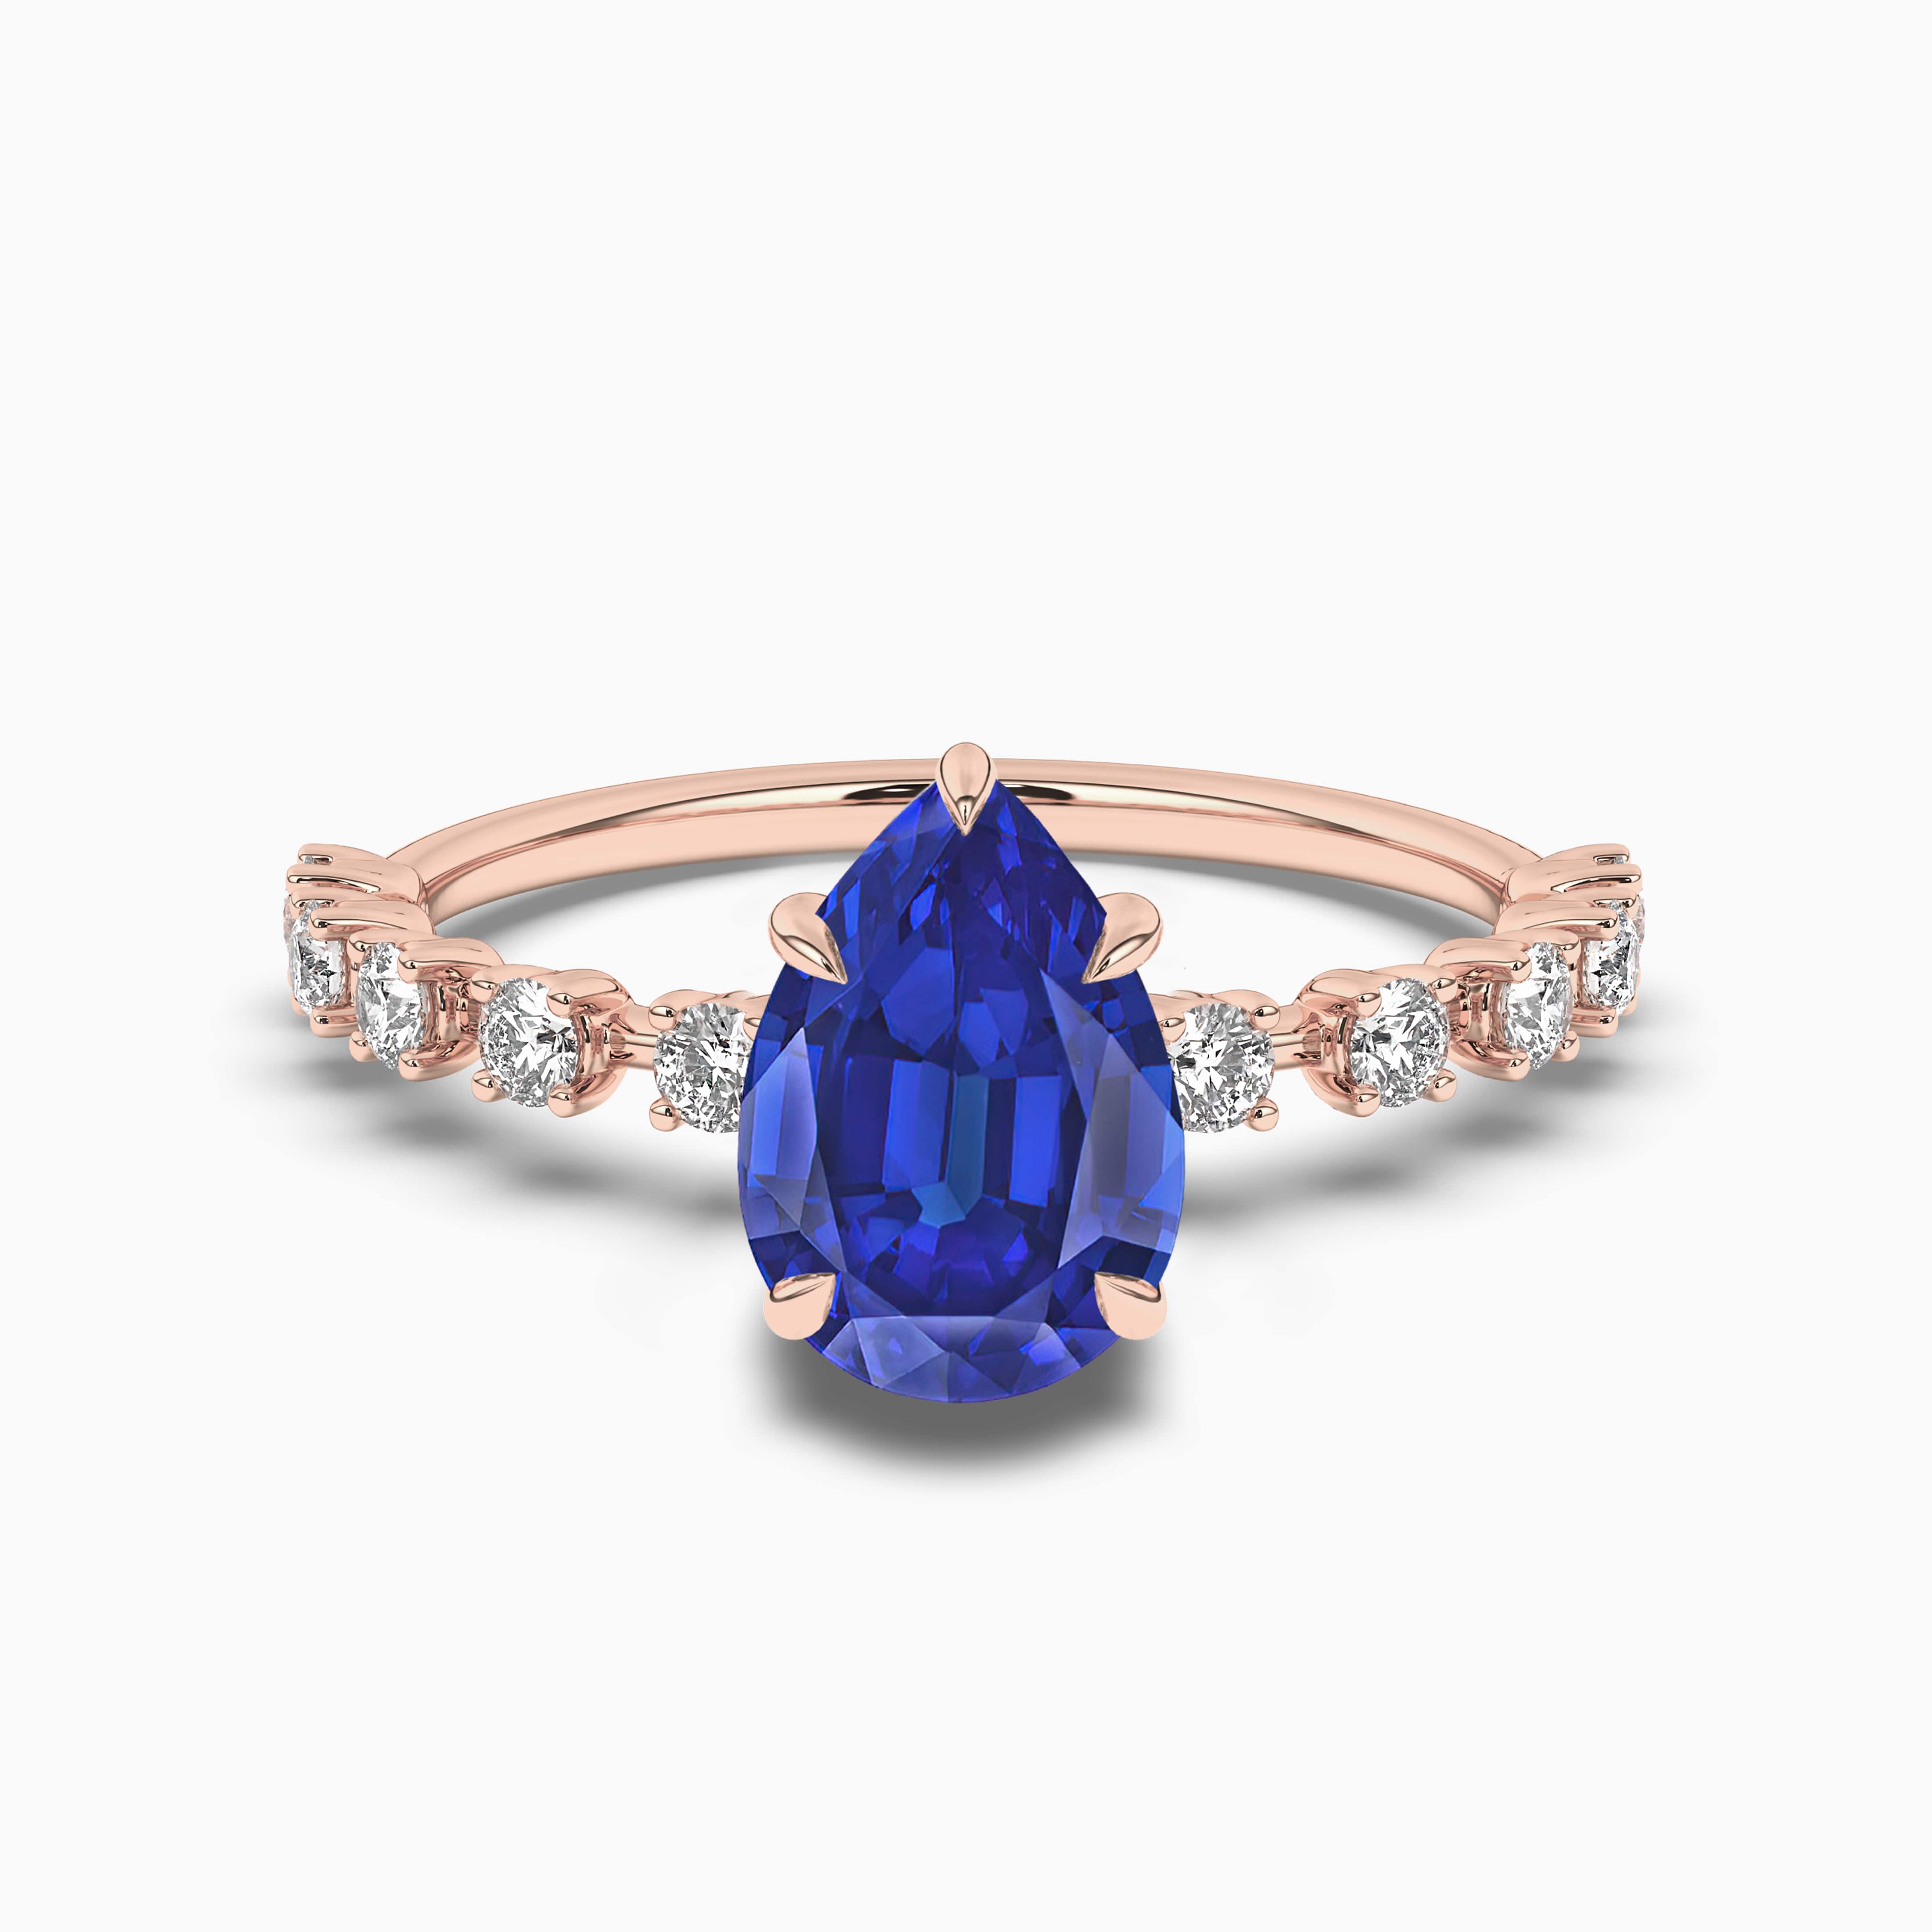 Pear shape Blue Sapphire Engagement Ring with Diamonds Rose Gold